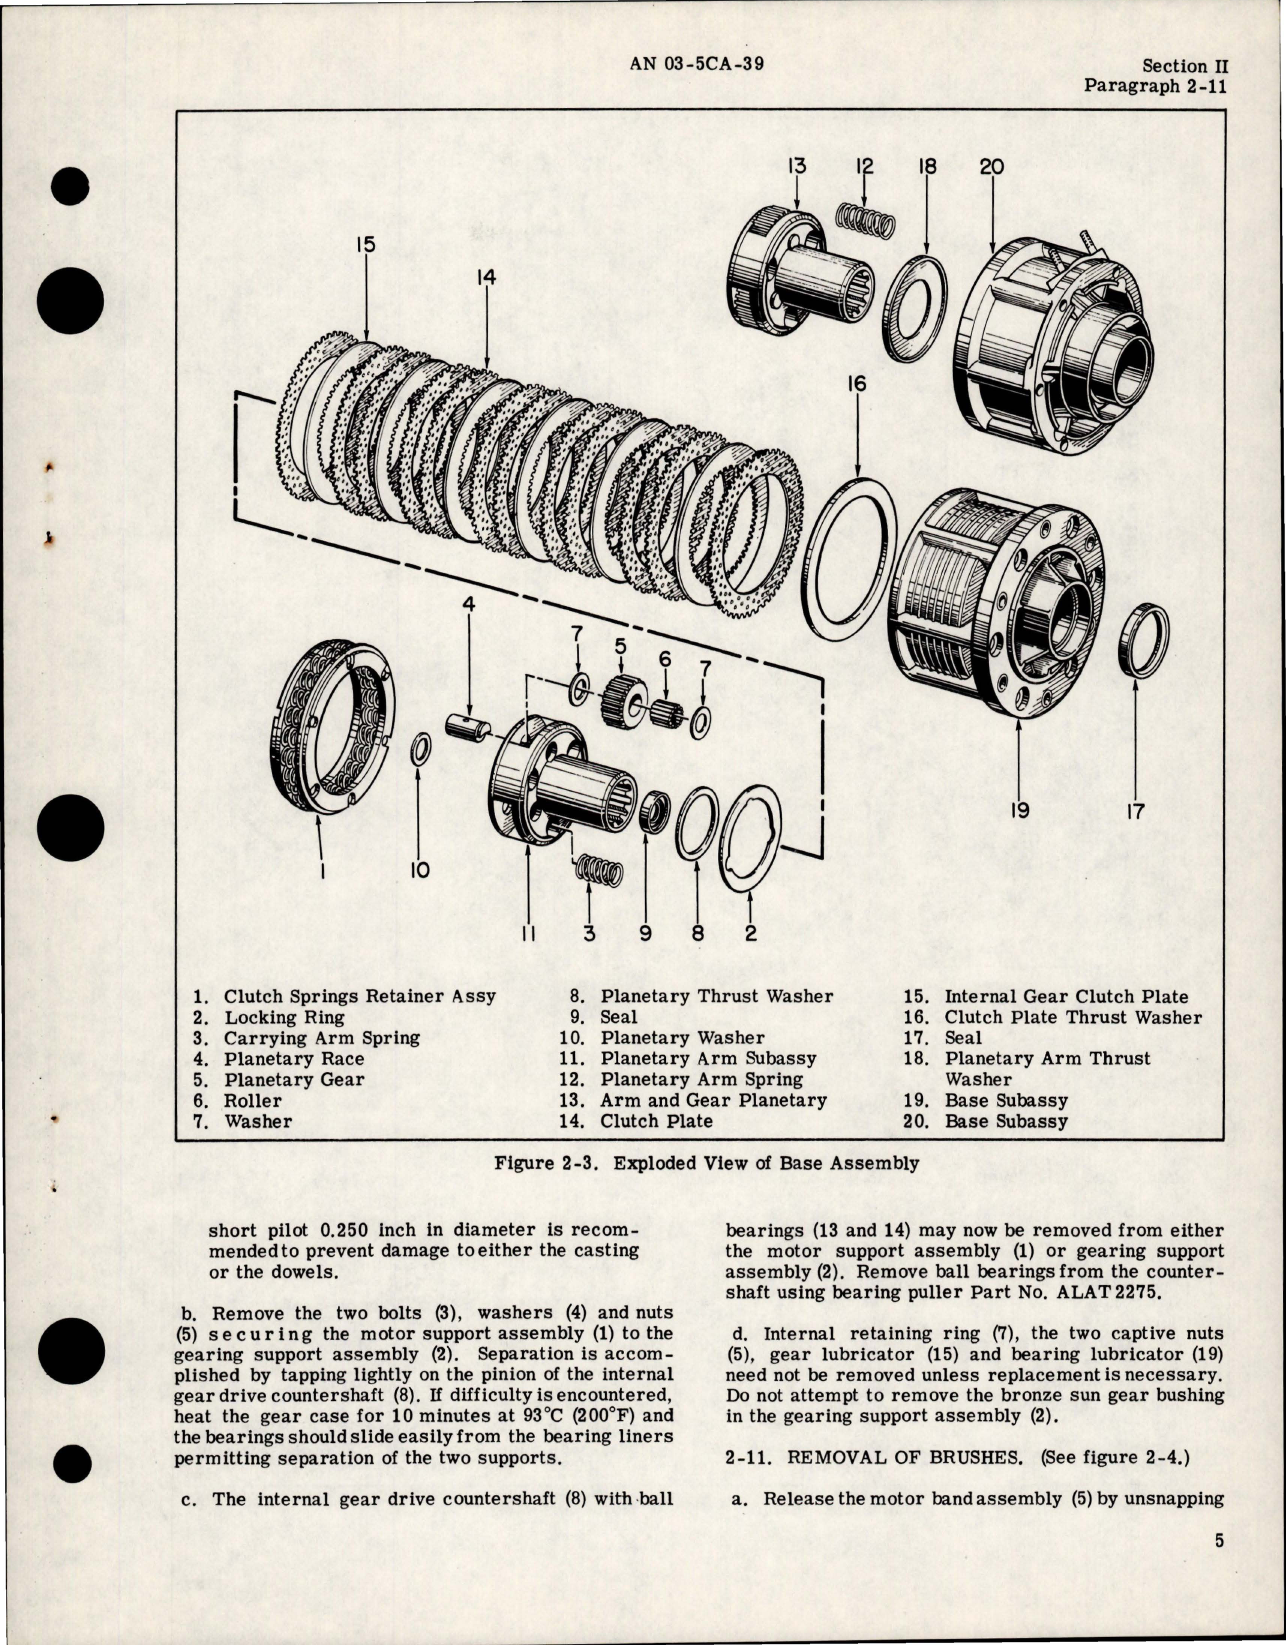 Sample page 9 from AirCorps Library document: Overhaul Instructions for Aircraft Engine Starters 